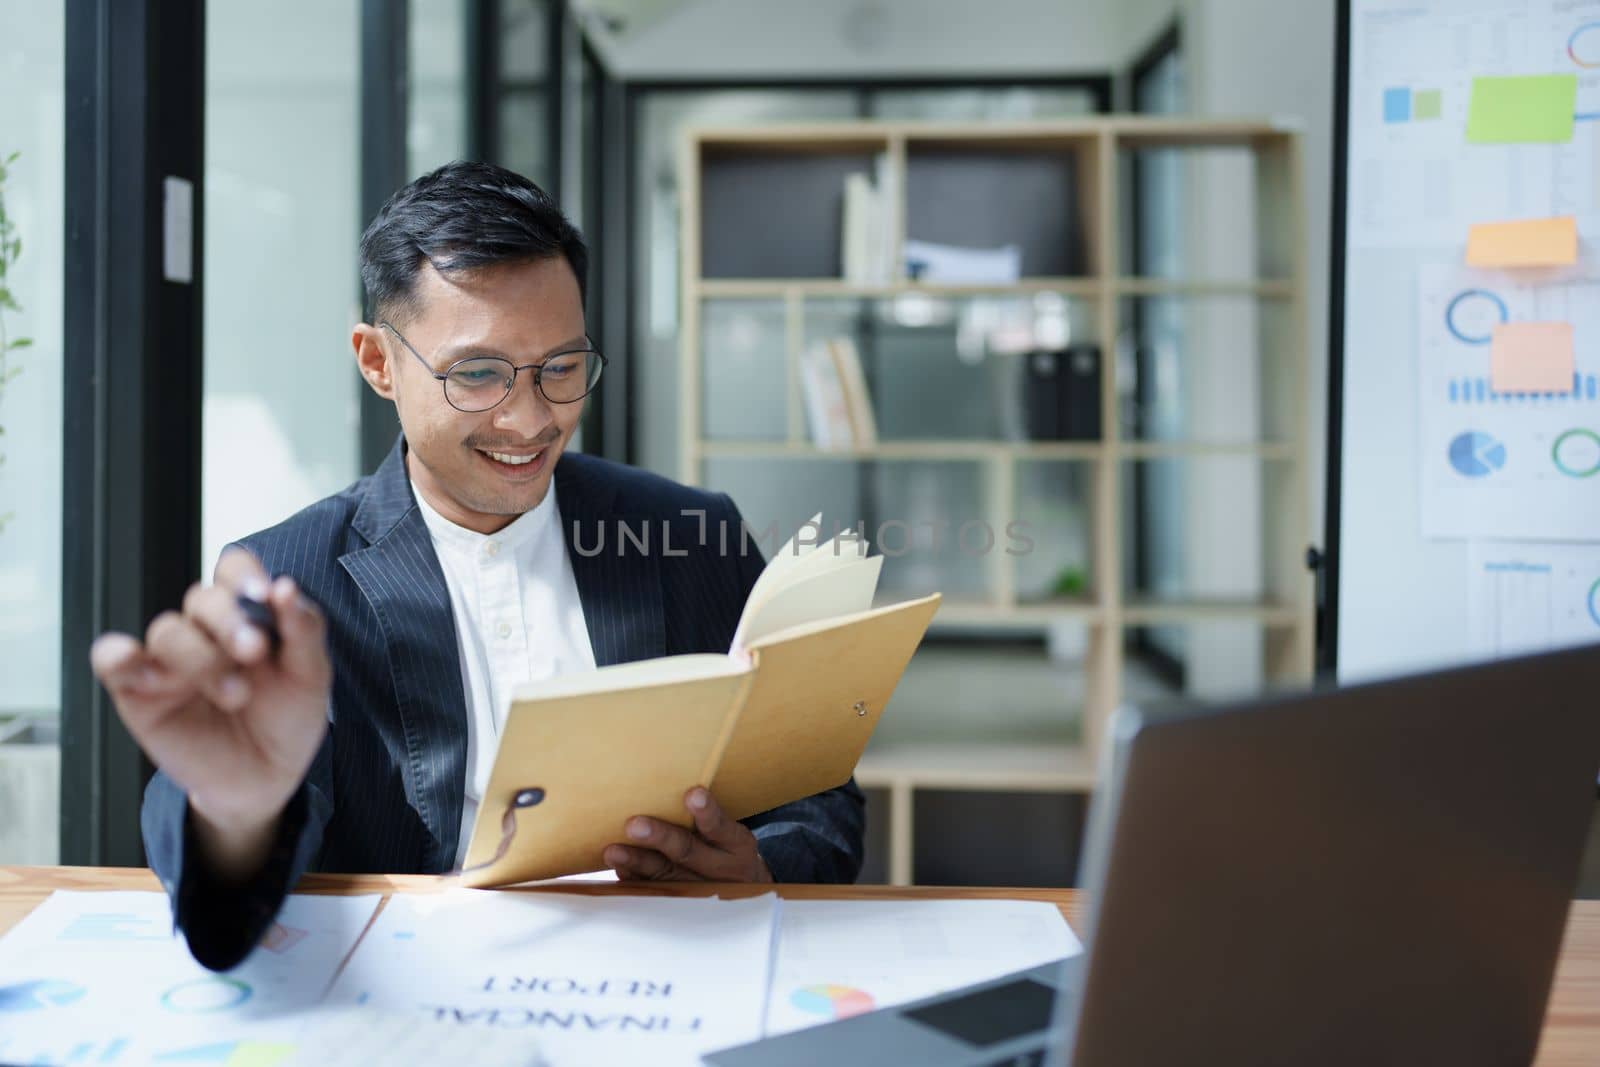 Portrait of a young Asian man showing a smiling face as she uses his notebook, computer and financial documents on her desk in the early morning hours by Manastrong